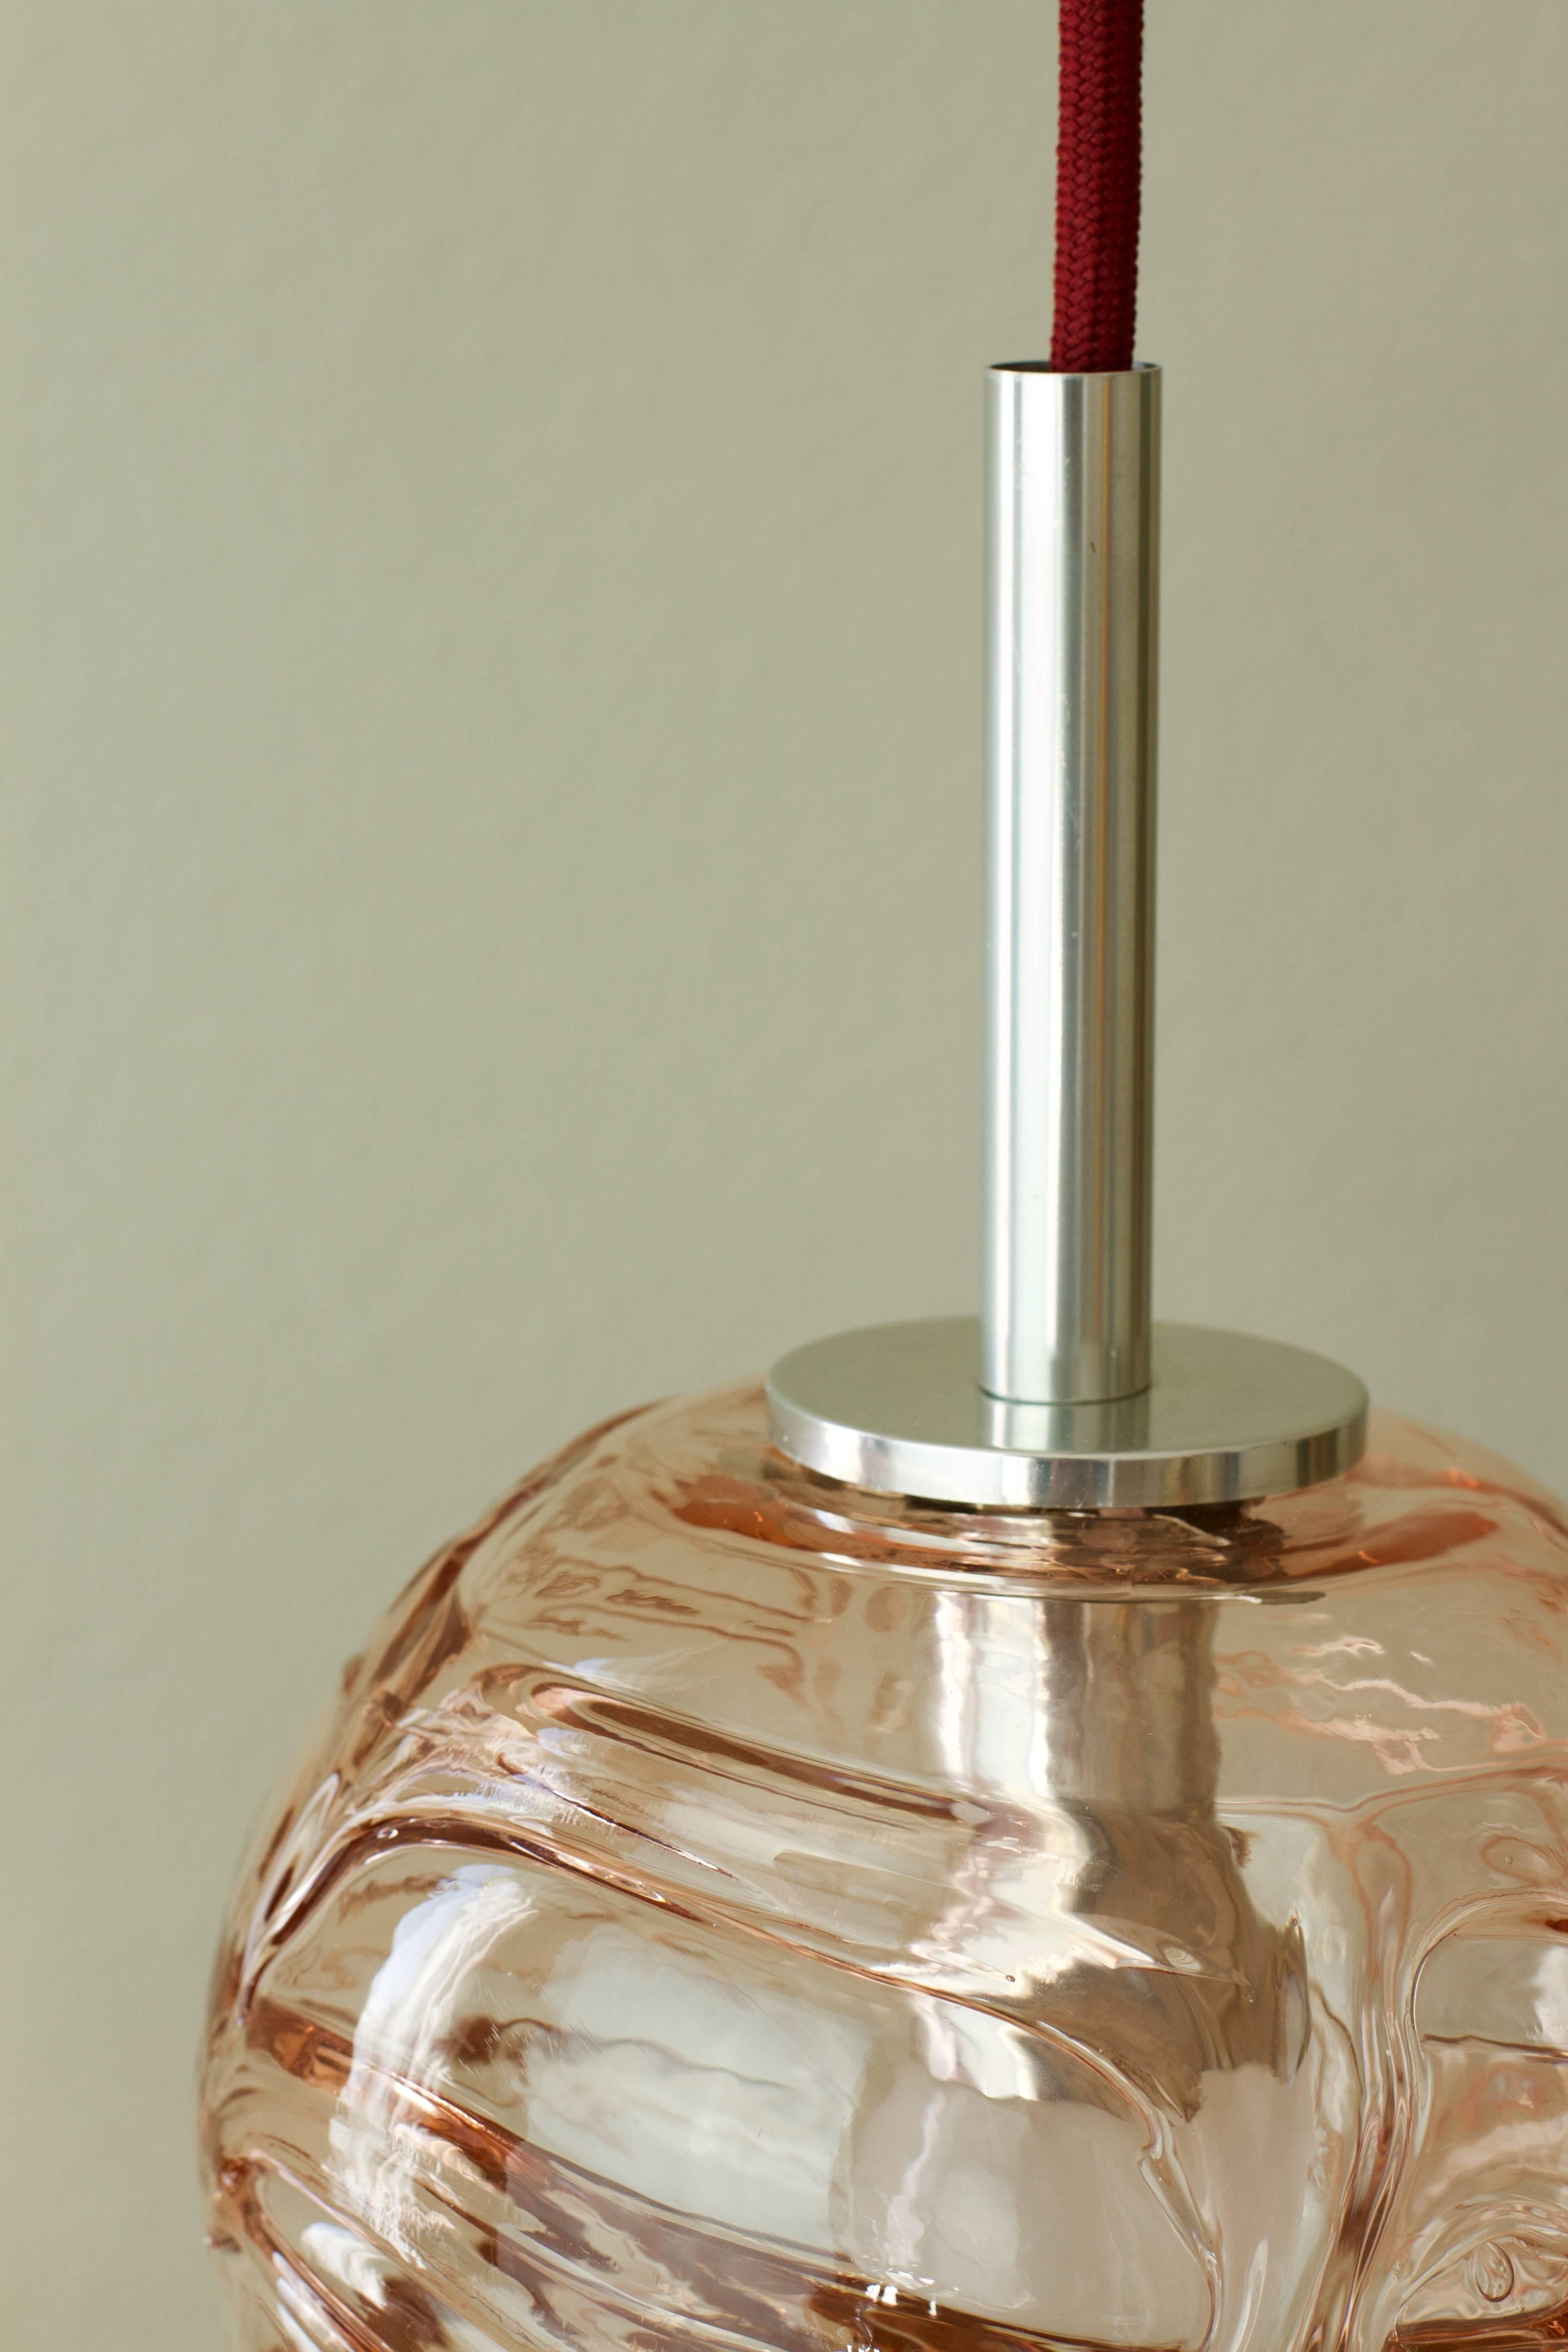 This beautiful little rose pink tinted Mid-Century glass pendant light by Doria Leuchten, Germany, is very minimal / minimalist. Made in the later half of the 1960s, this gorgeous little pendent features wonderfully made, mouth blown Murano glass